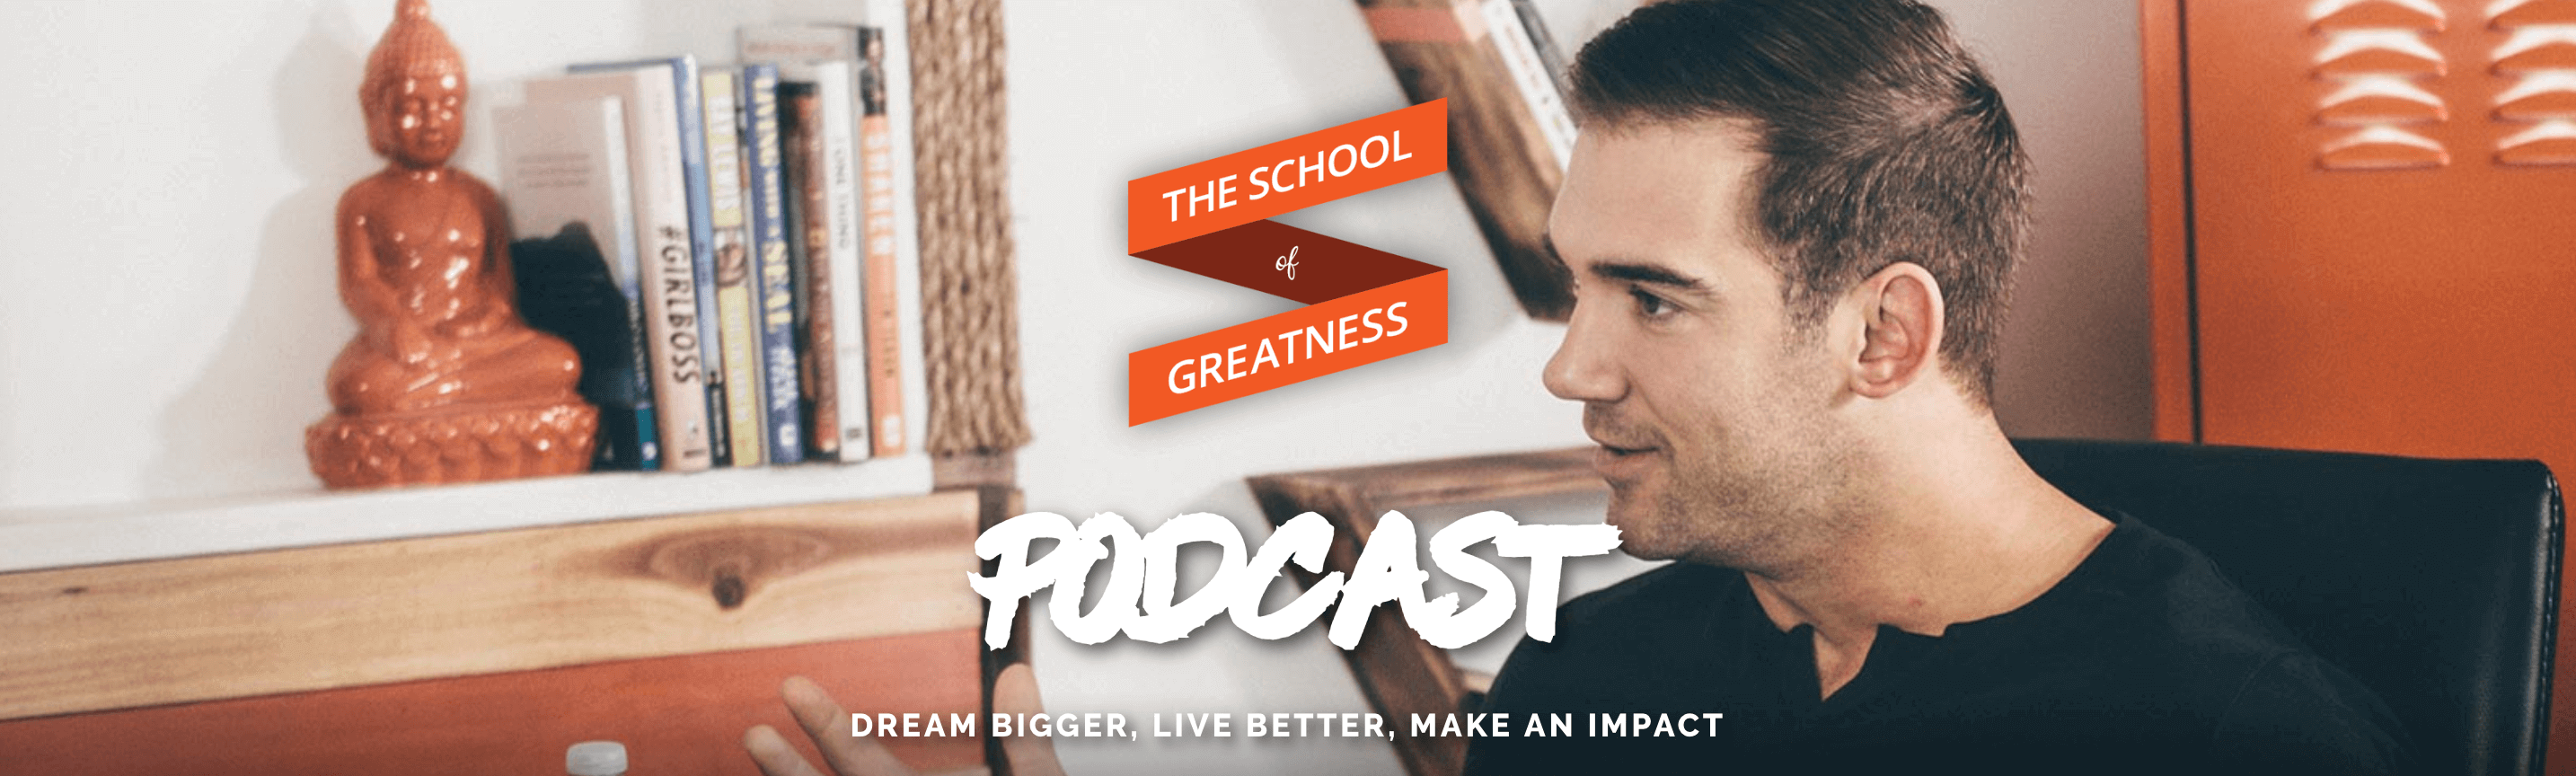 The School of Greatness Podcast